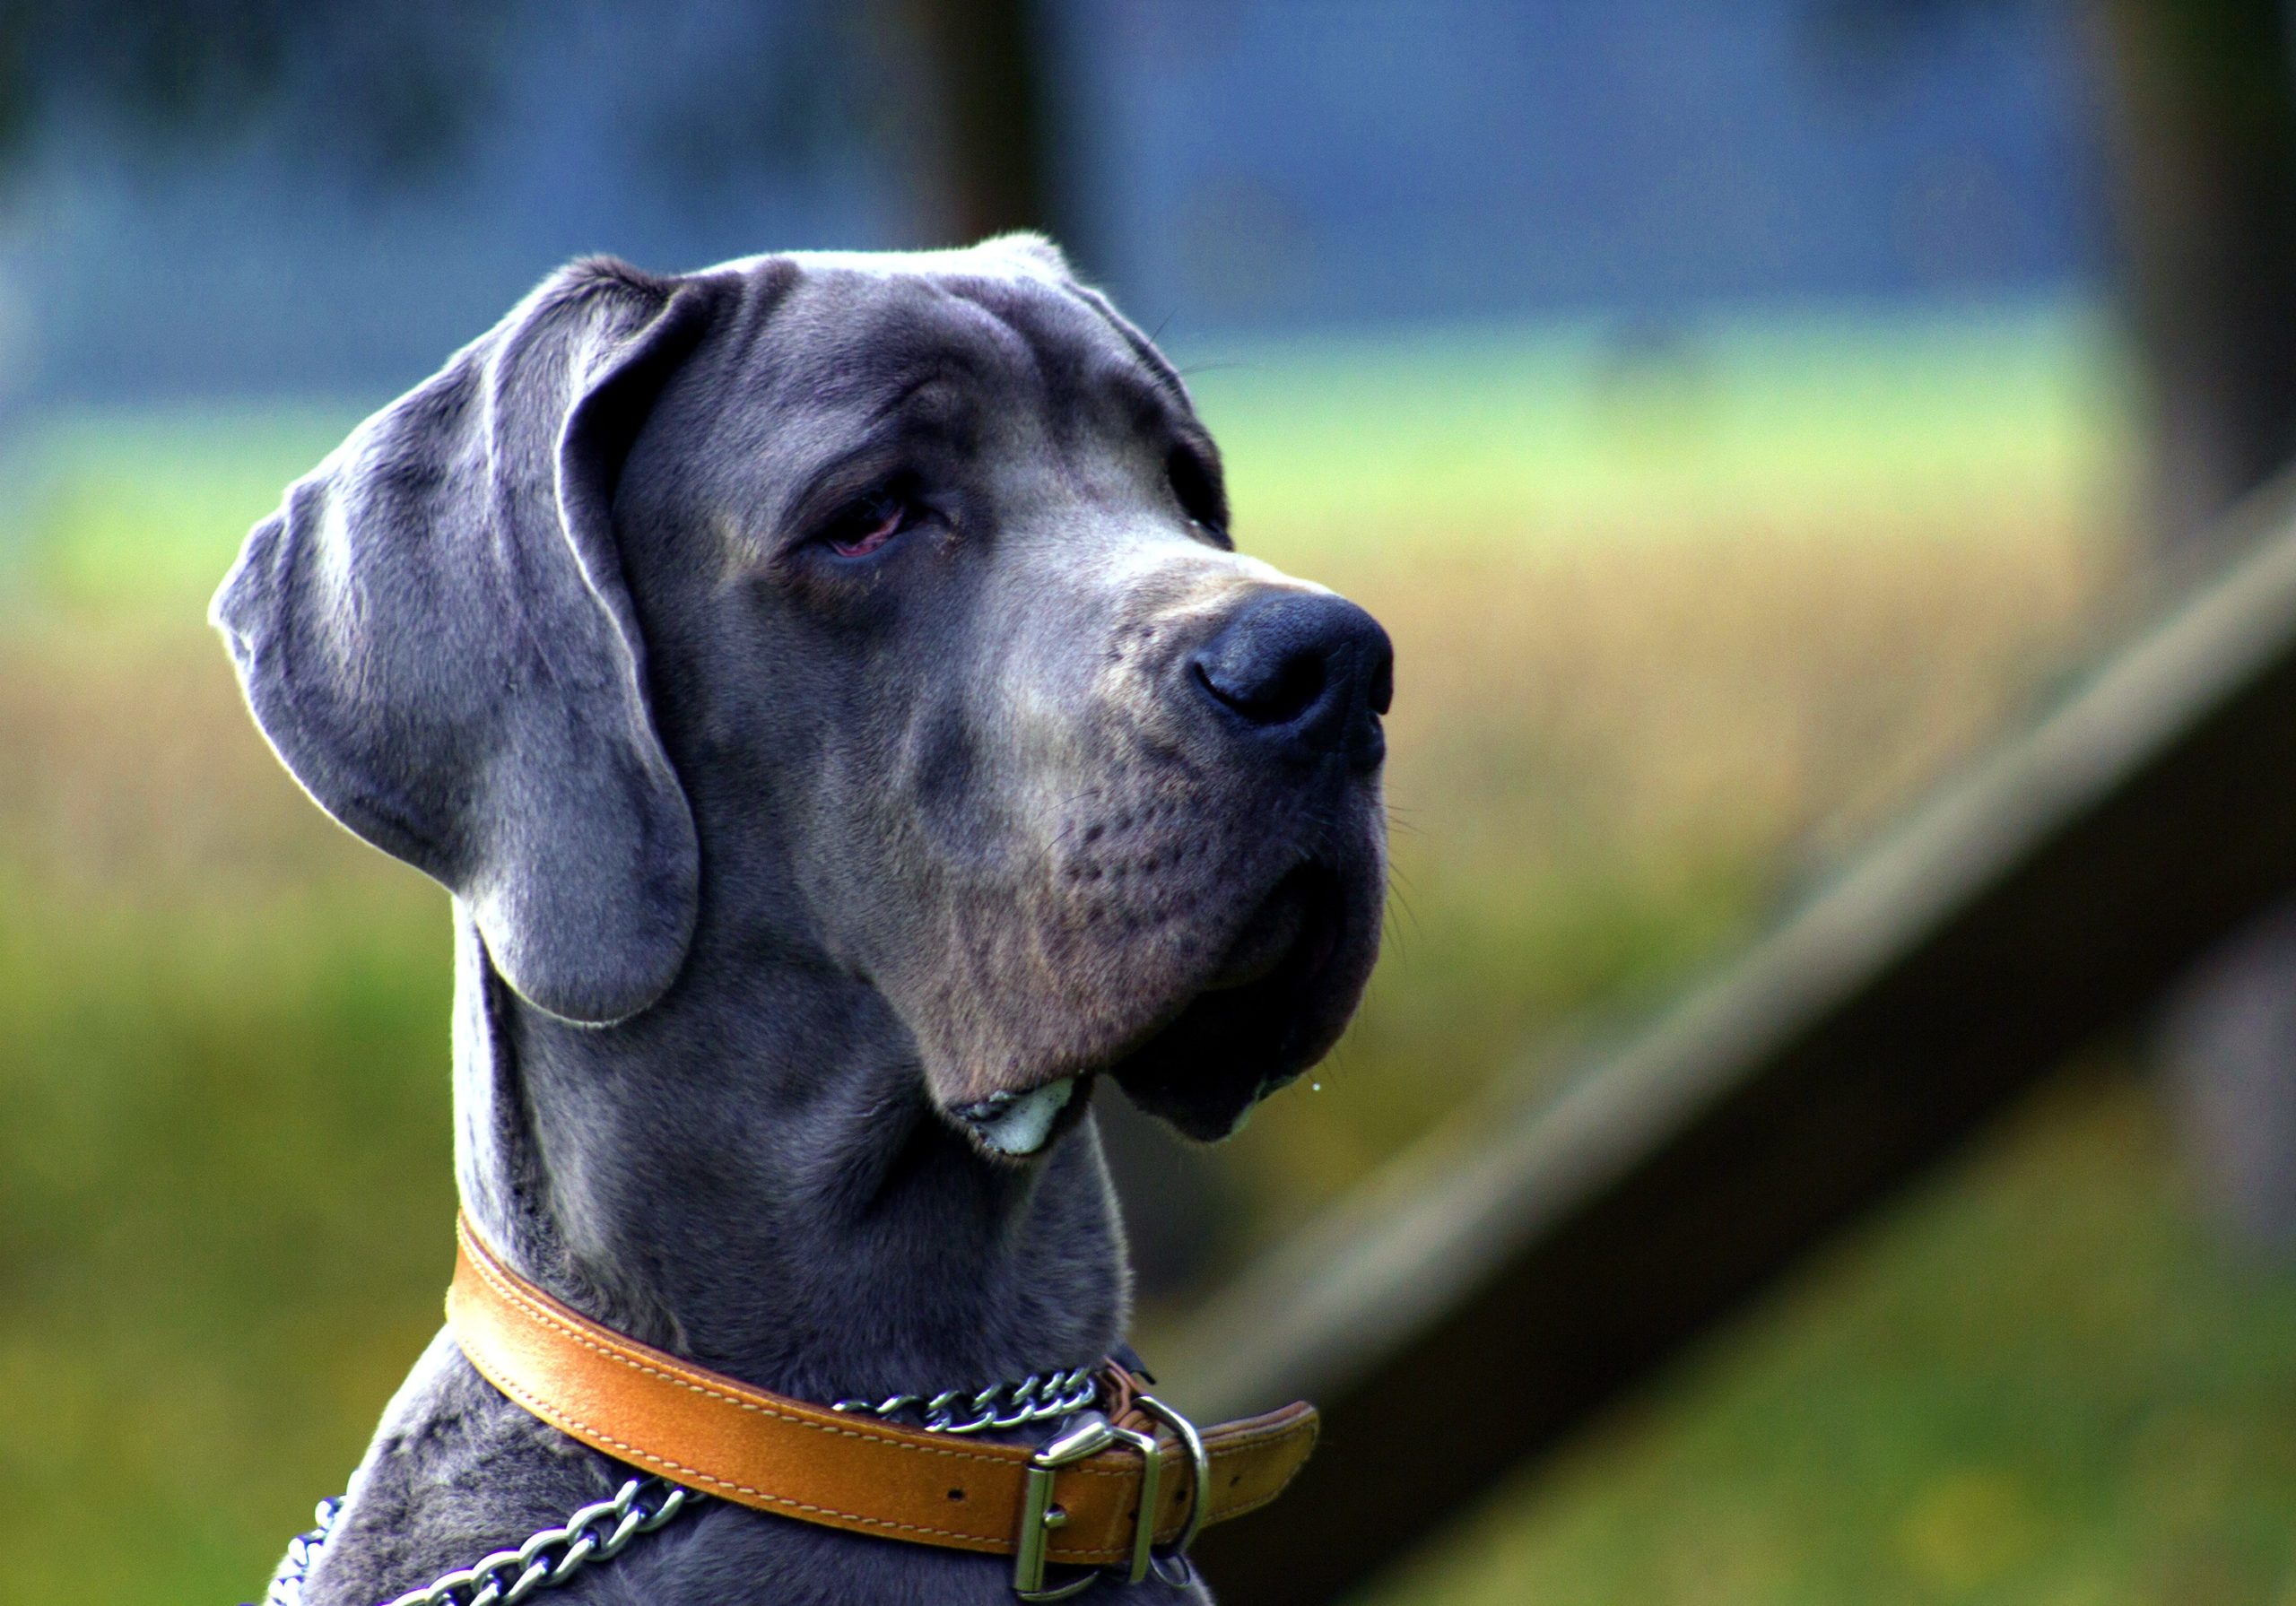 How Much Is A Blue Cane Corso?